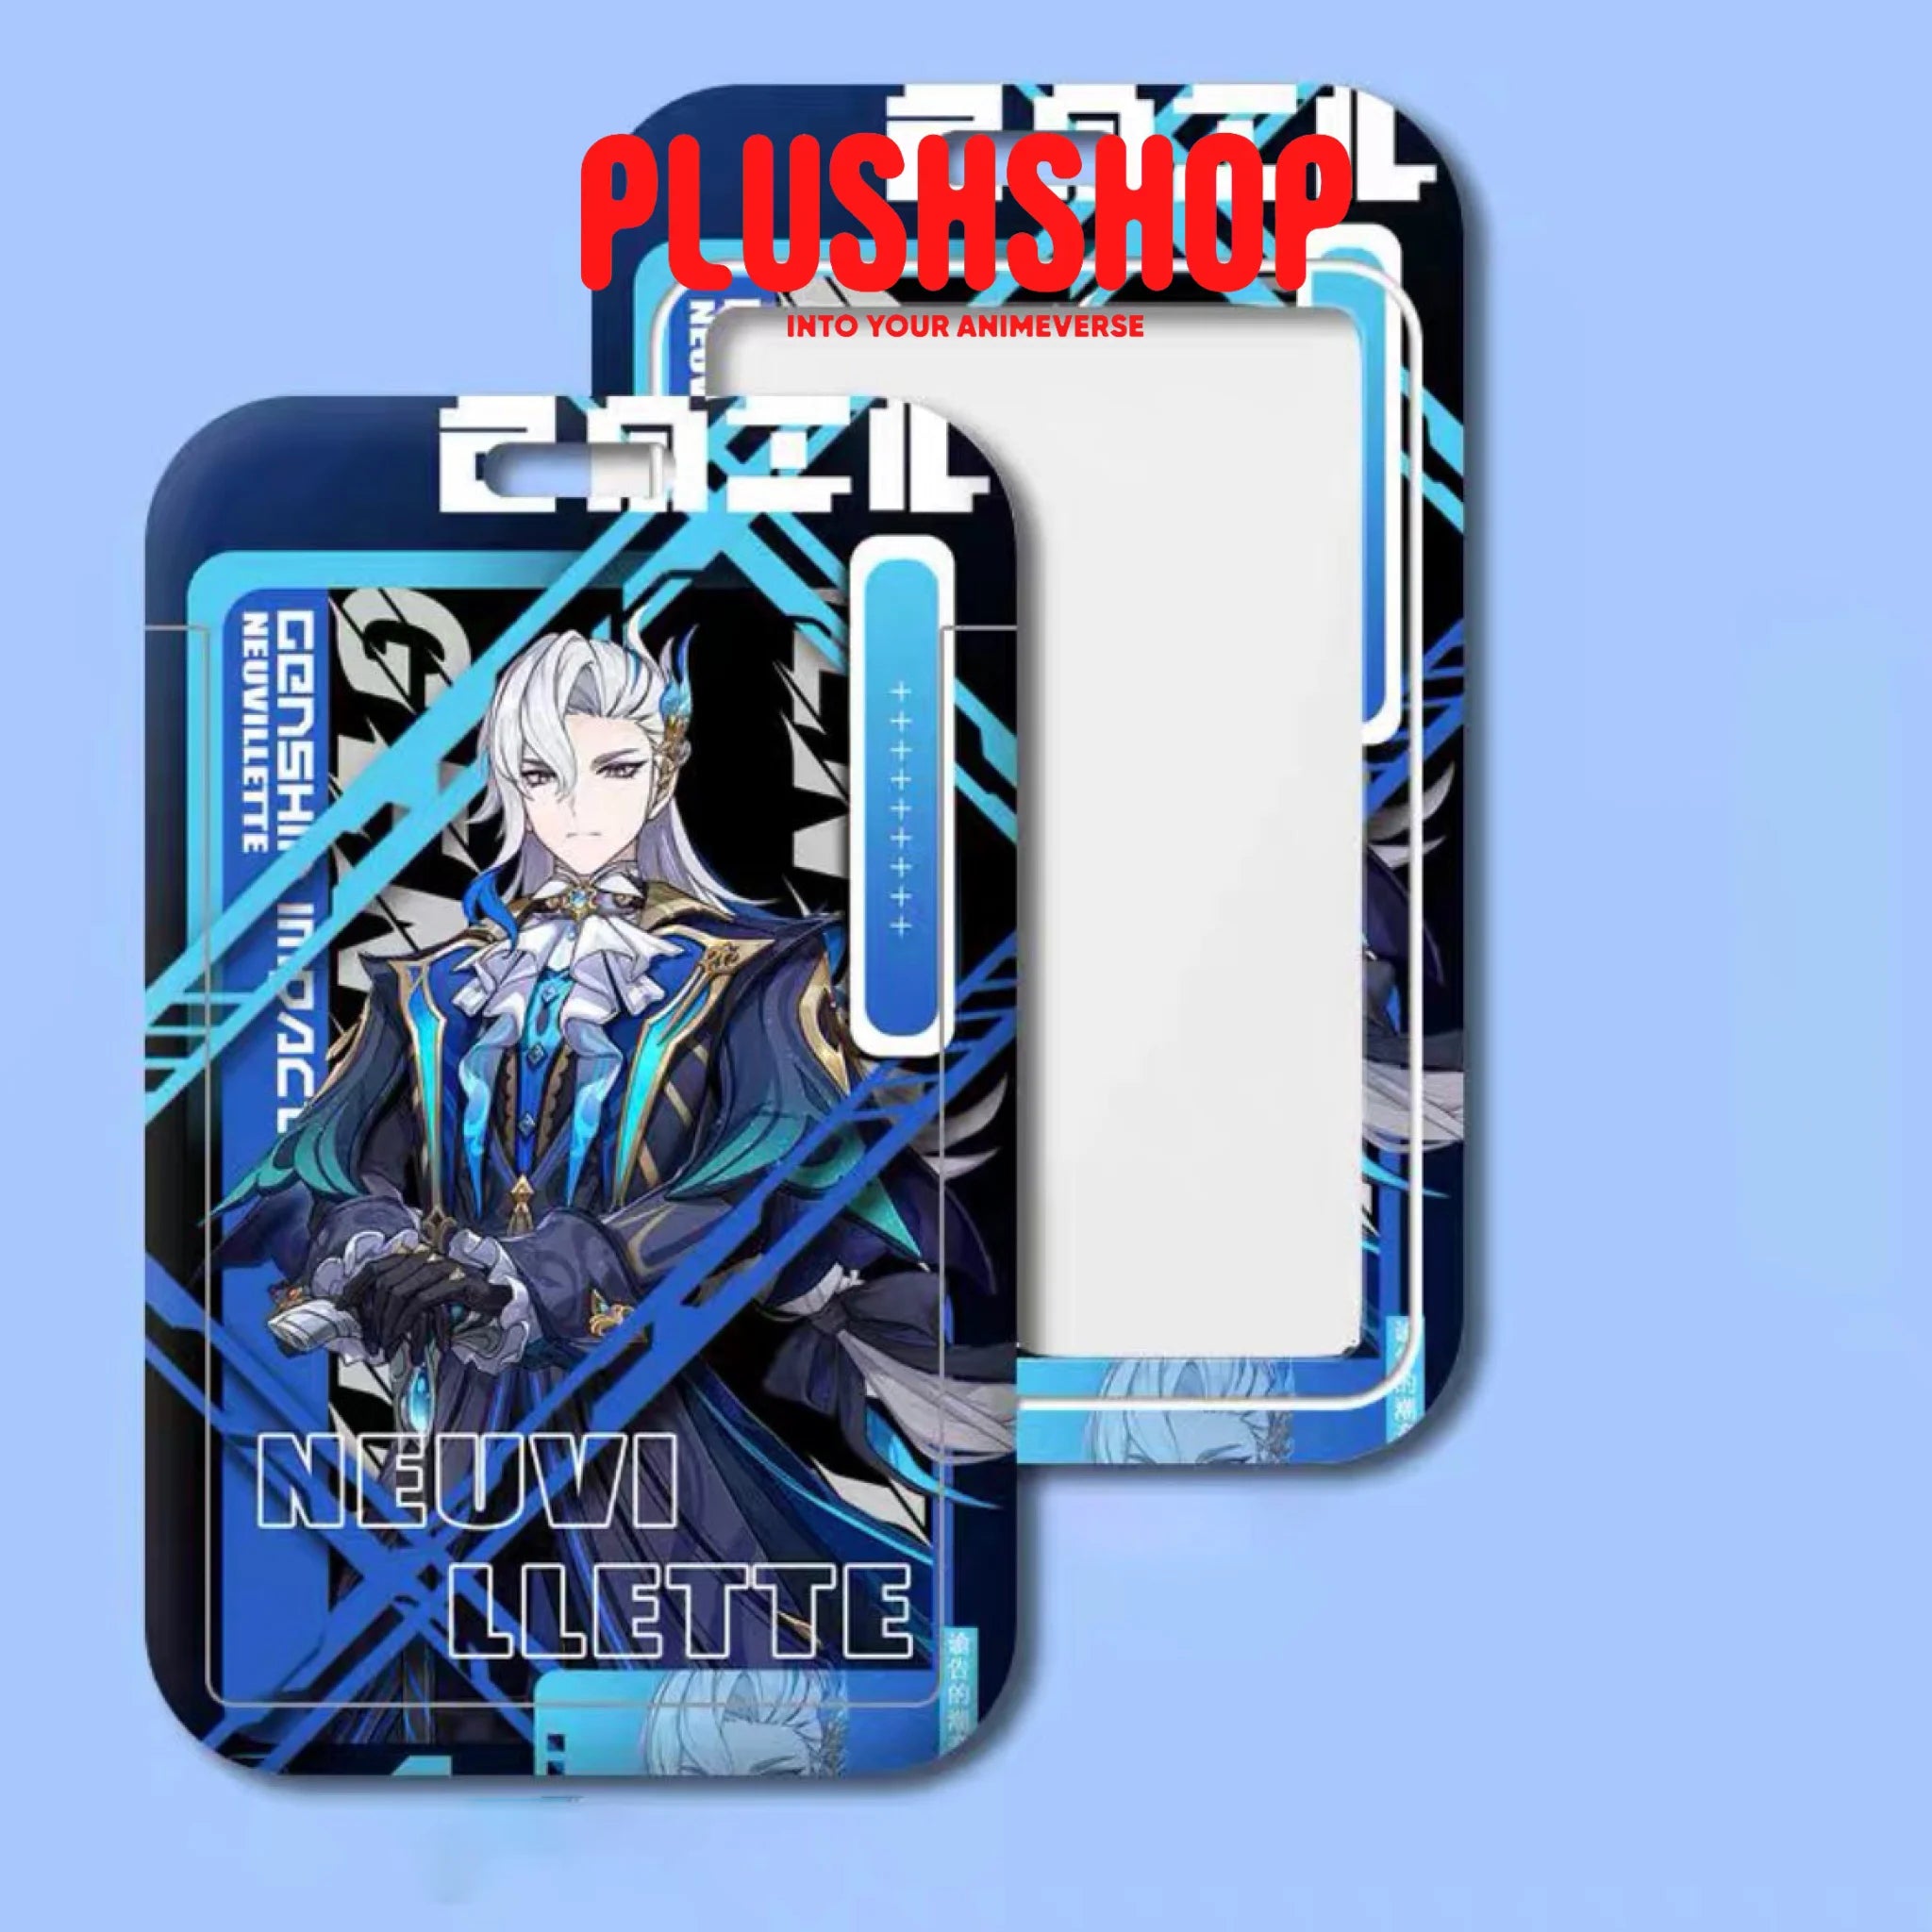 Genshin Impact Fontaine Characters Neuvillette Lyney Lynette Furina Wriot Hesley Card Holder